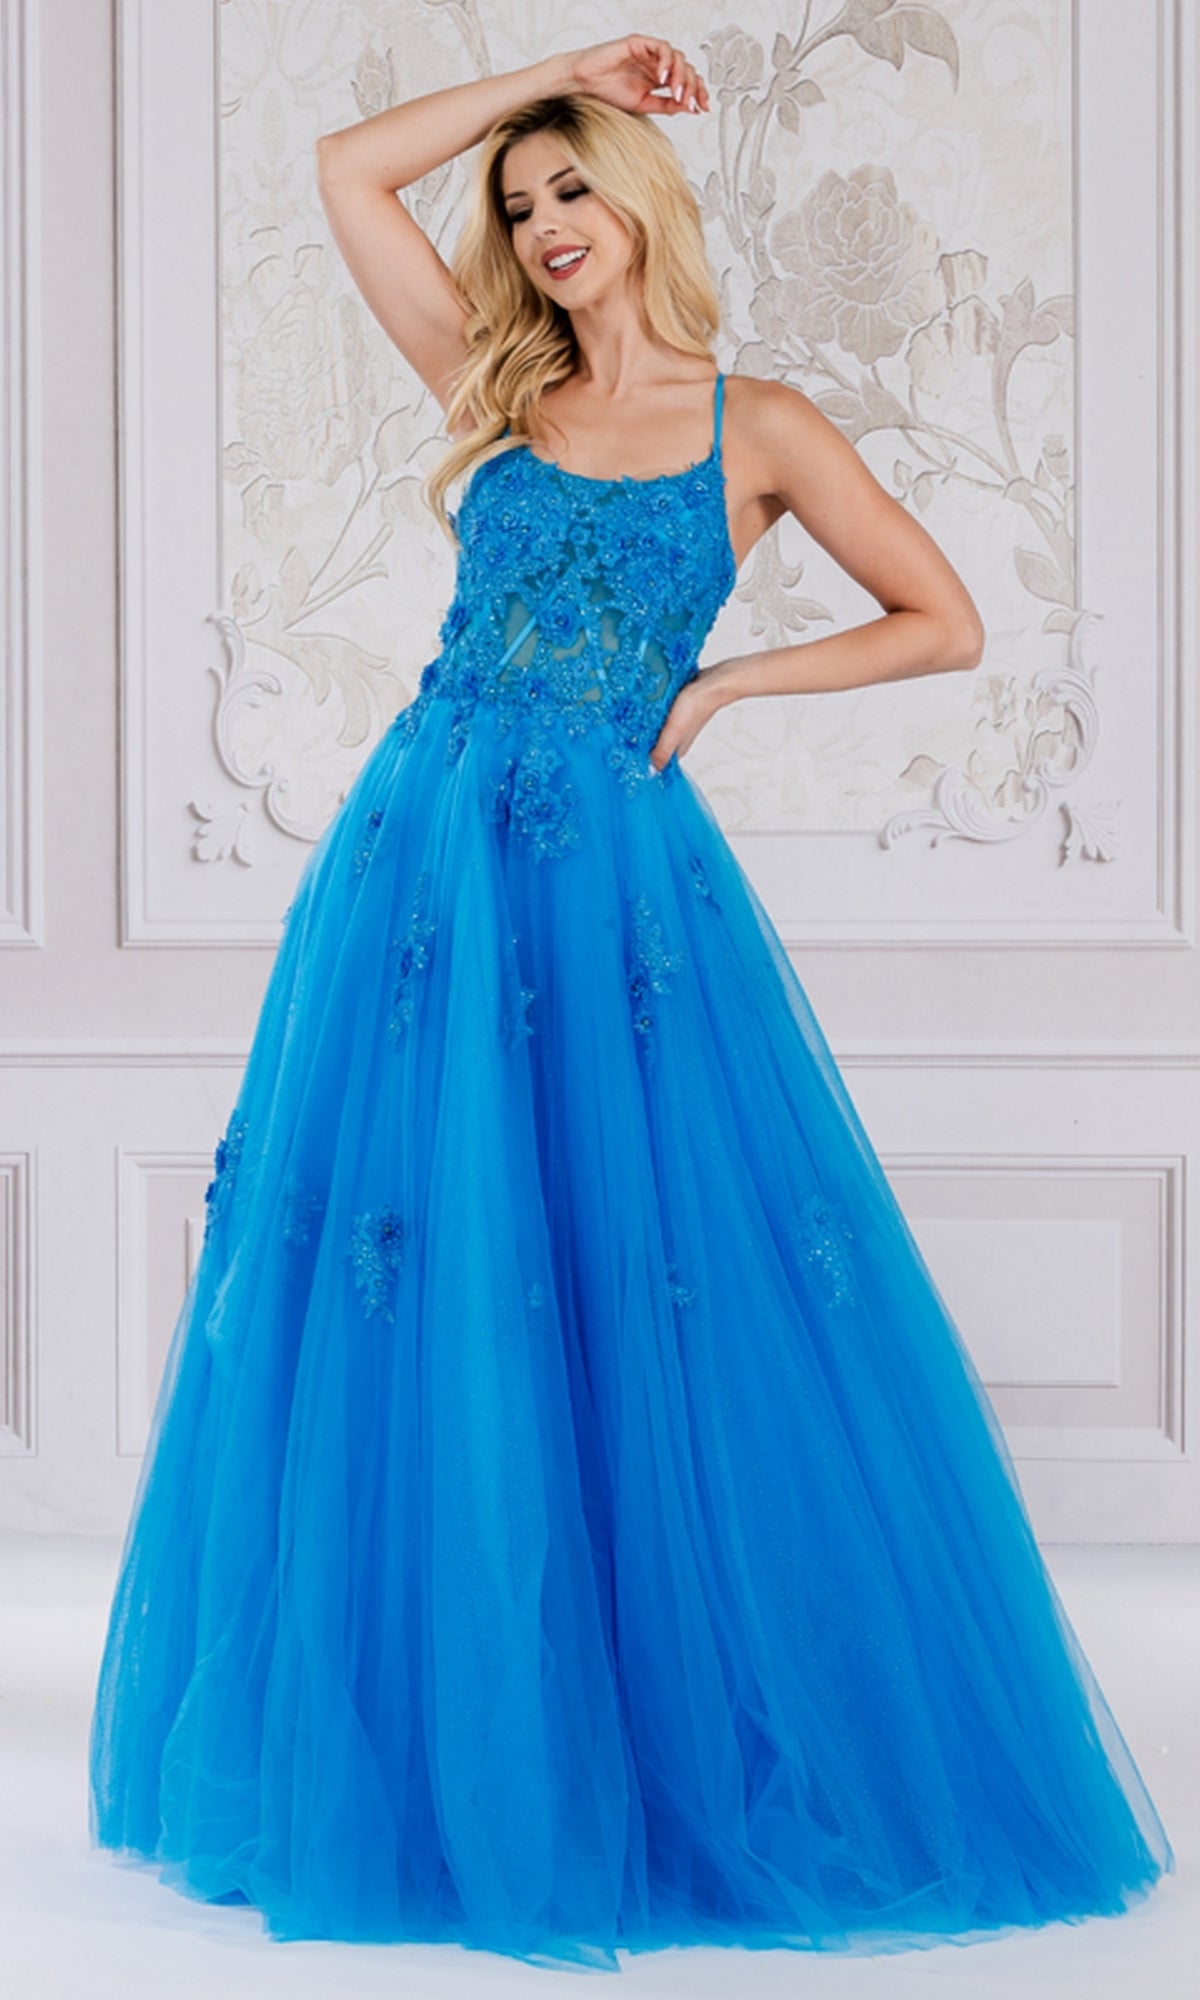 Long Tulle Prom Ball Gown with Embroidery - PromGirl